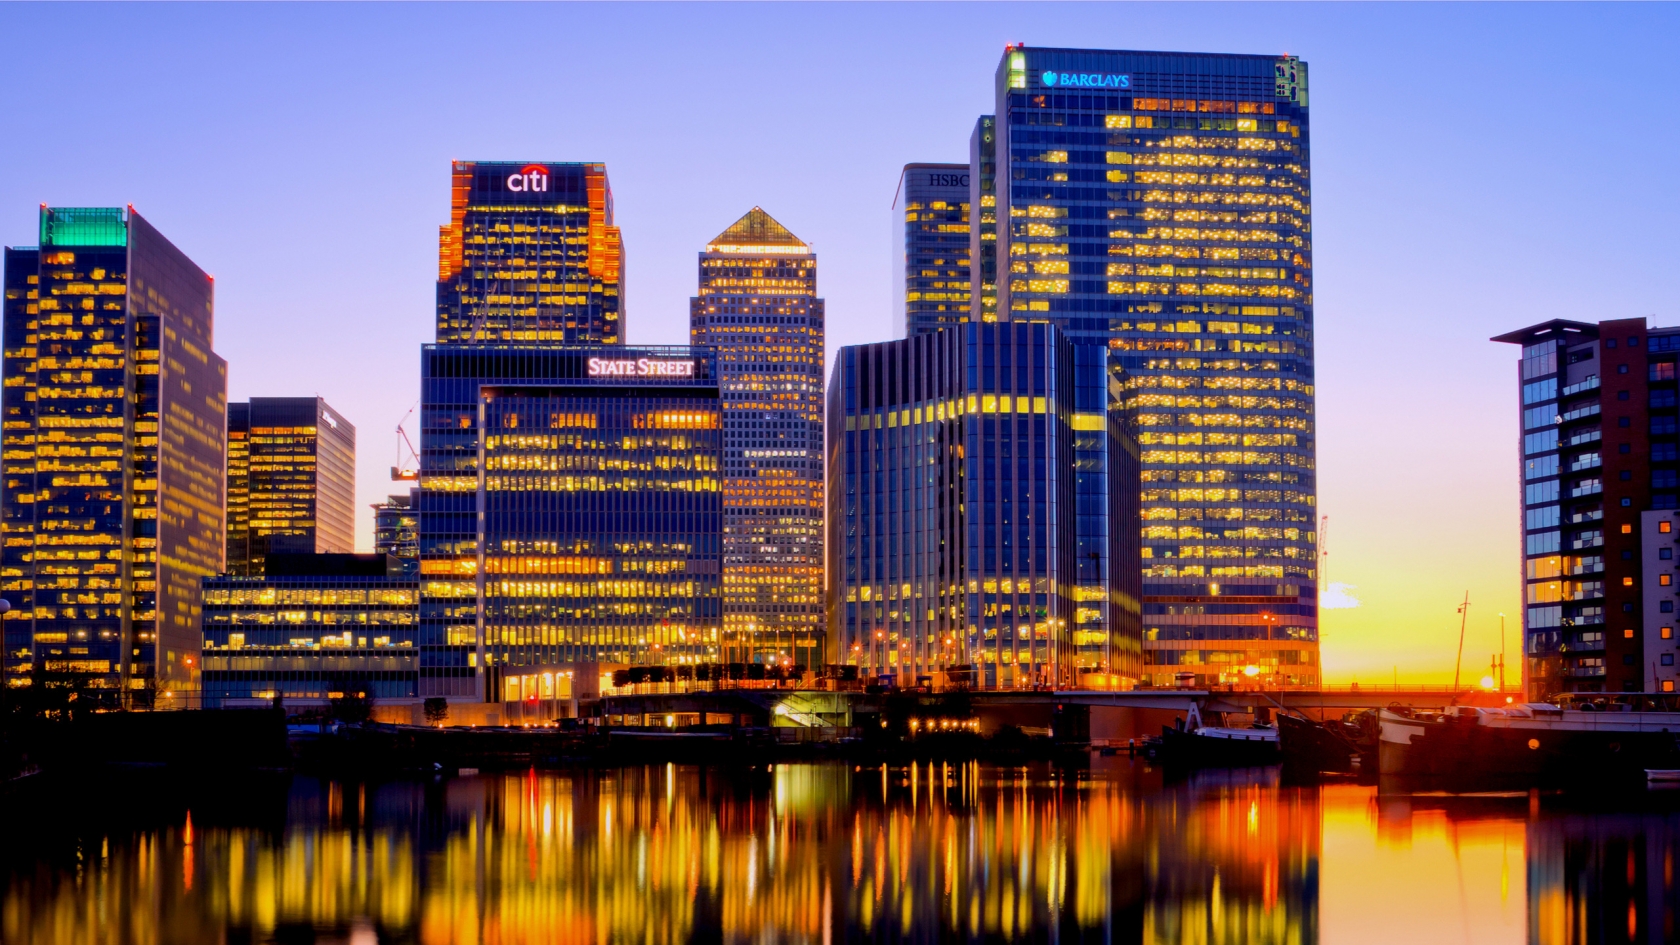 London Canary Wharf for 1680 x 945 HDTV resolution